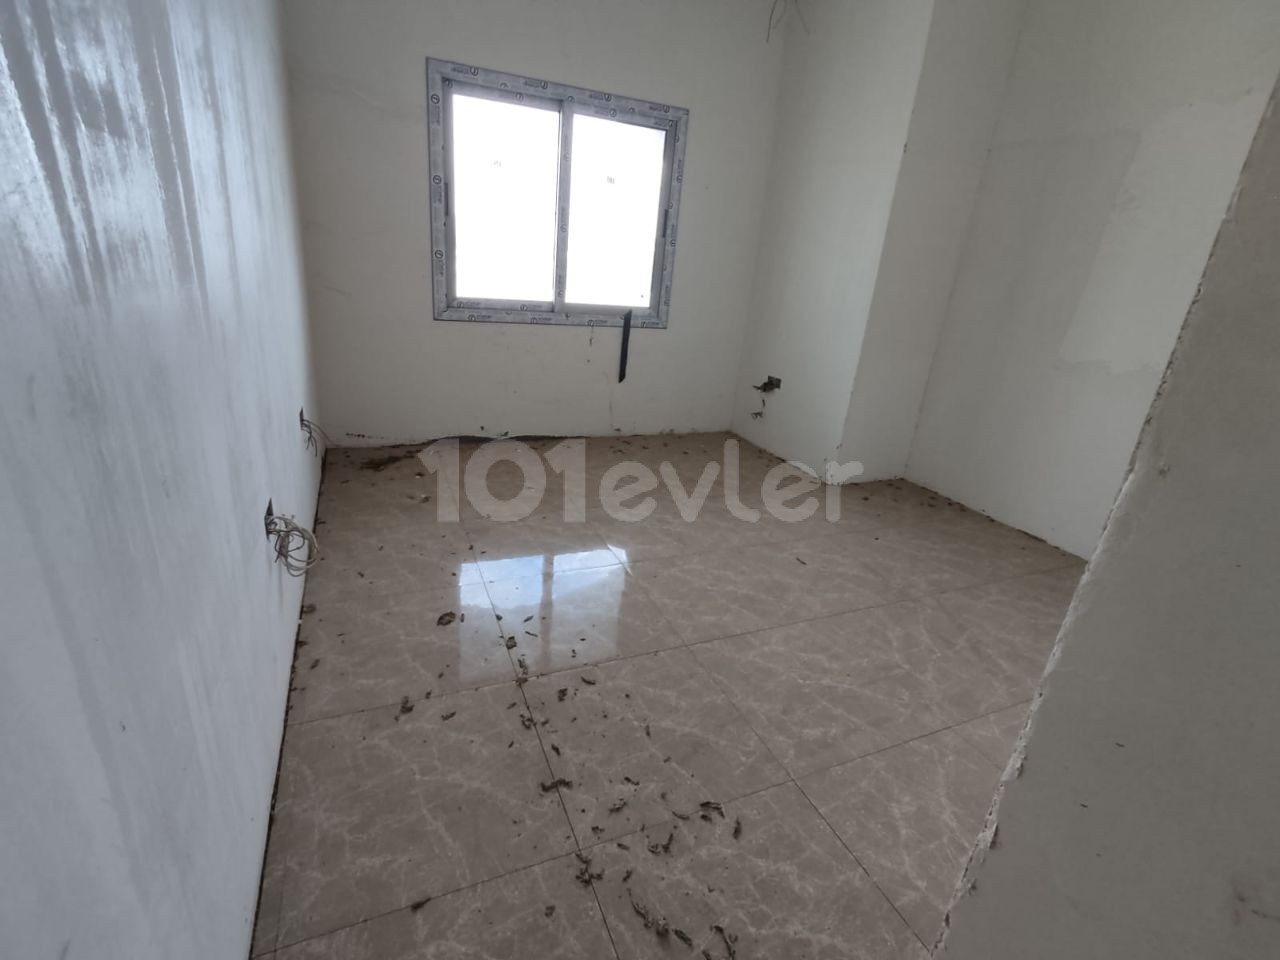 DETACHED HOUSE FOR SALE IN MİNARELİKÖY AREA